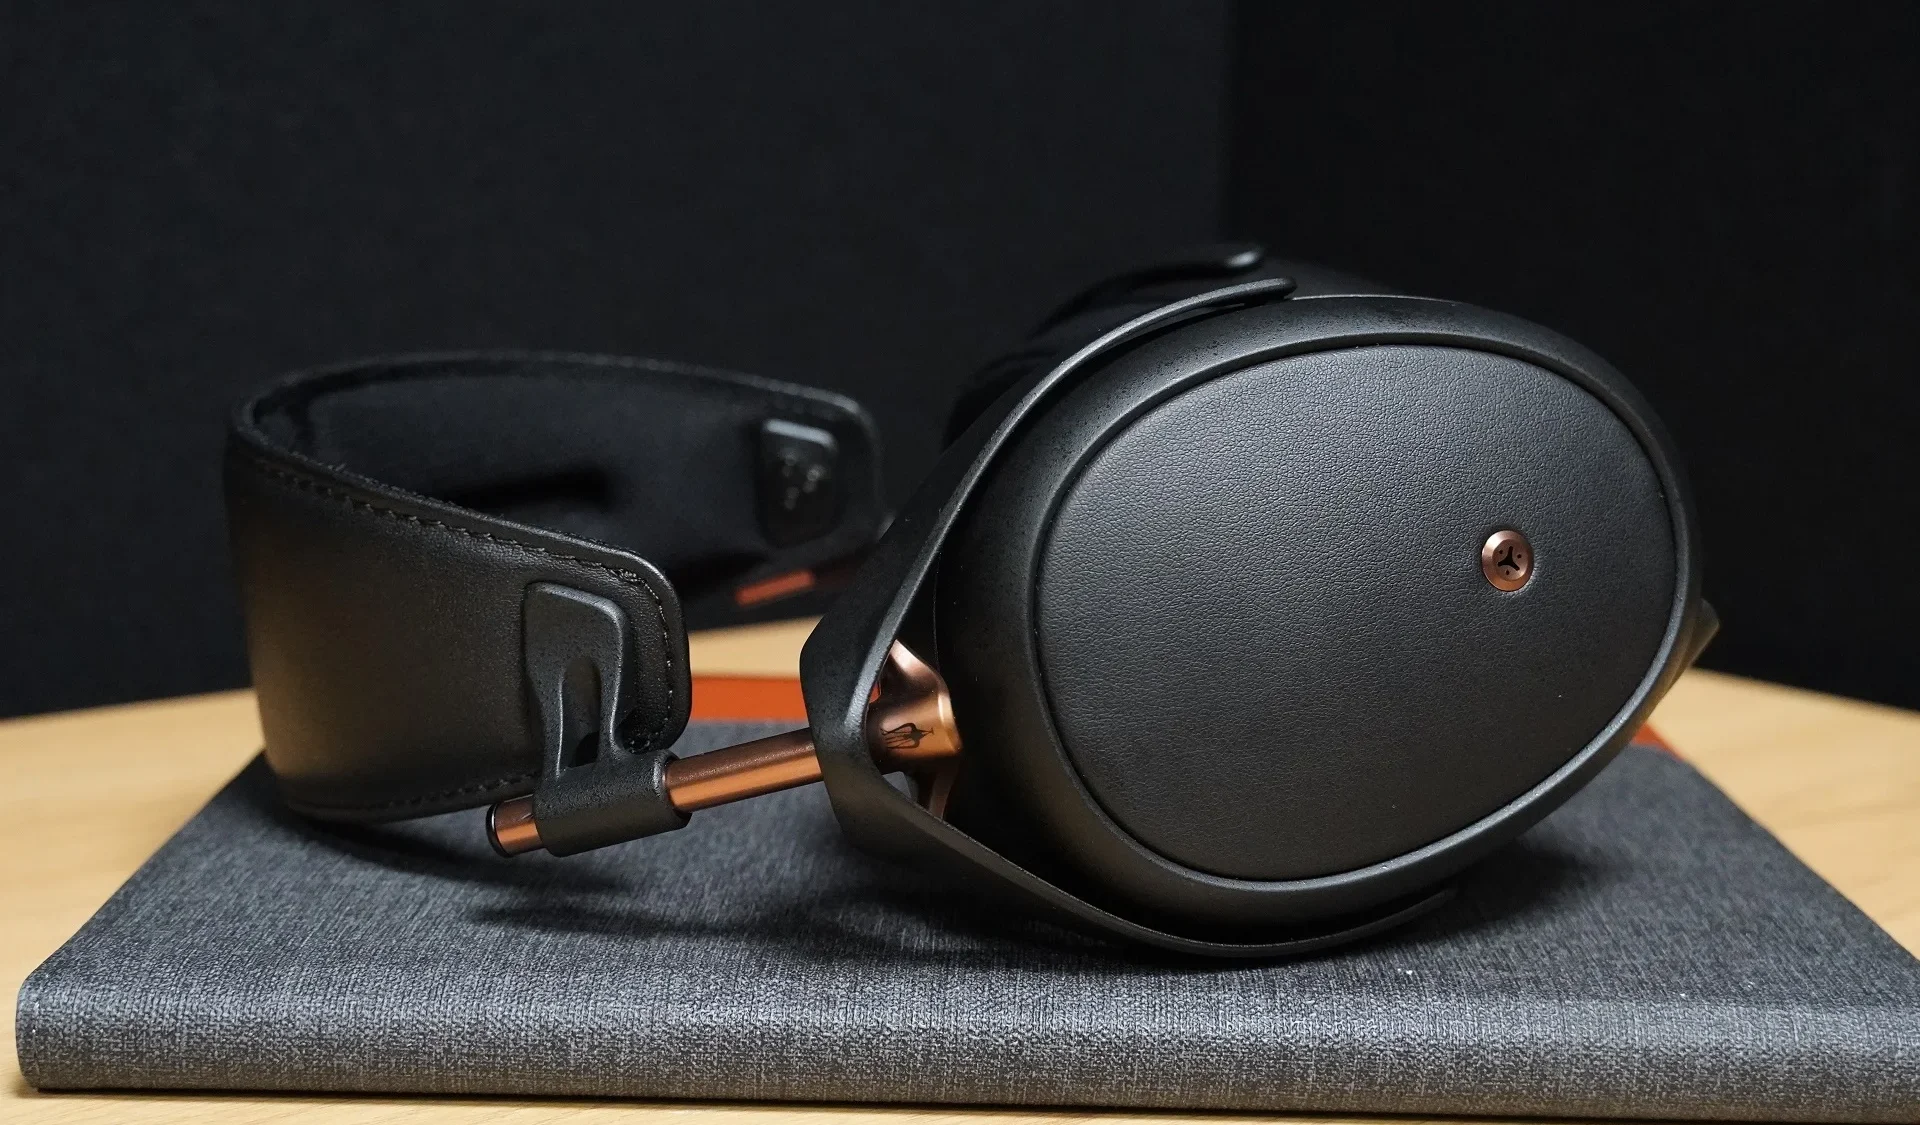 Top 5 Noise-Cancelling Headphones You Should Consider in 2023